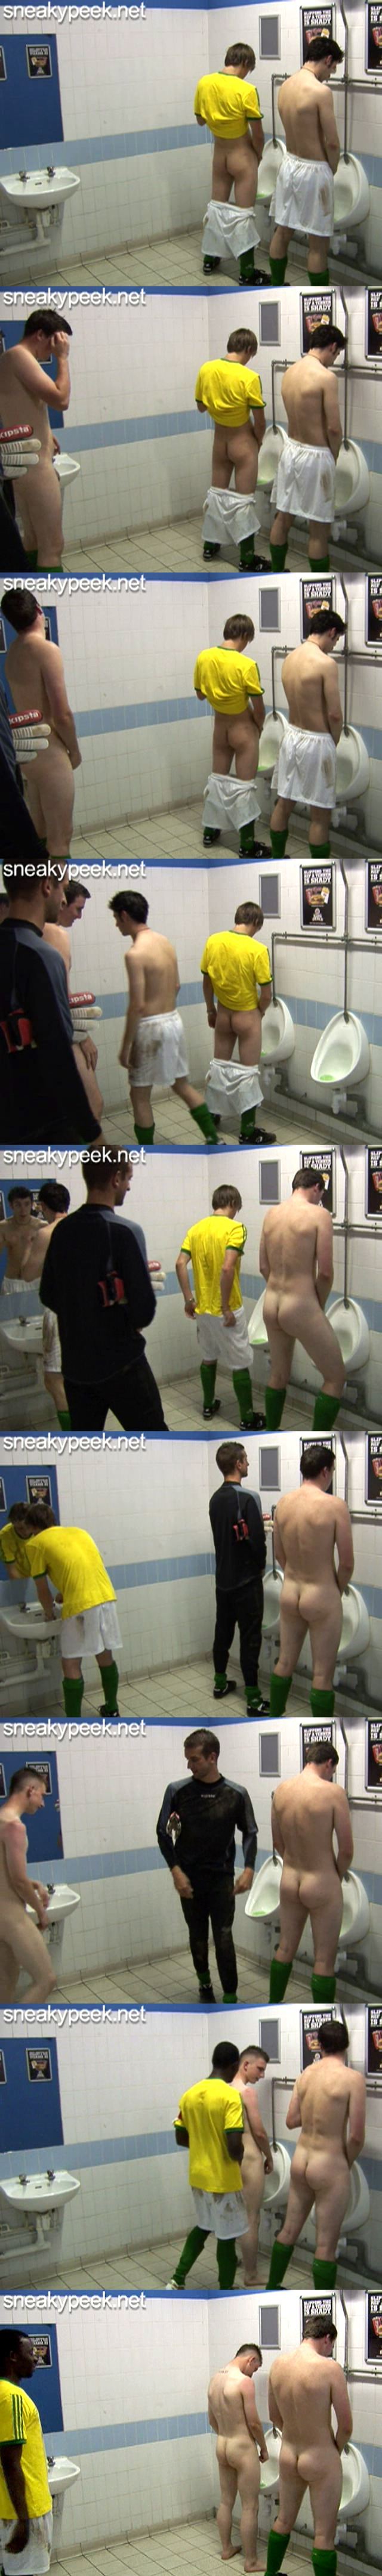 footballers even totally naked caught peeing at the urinals in locker room